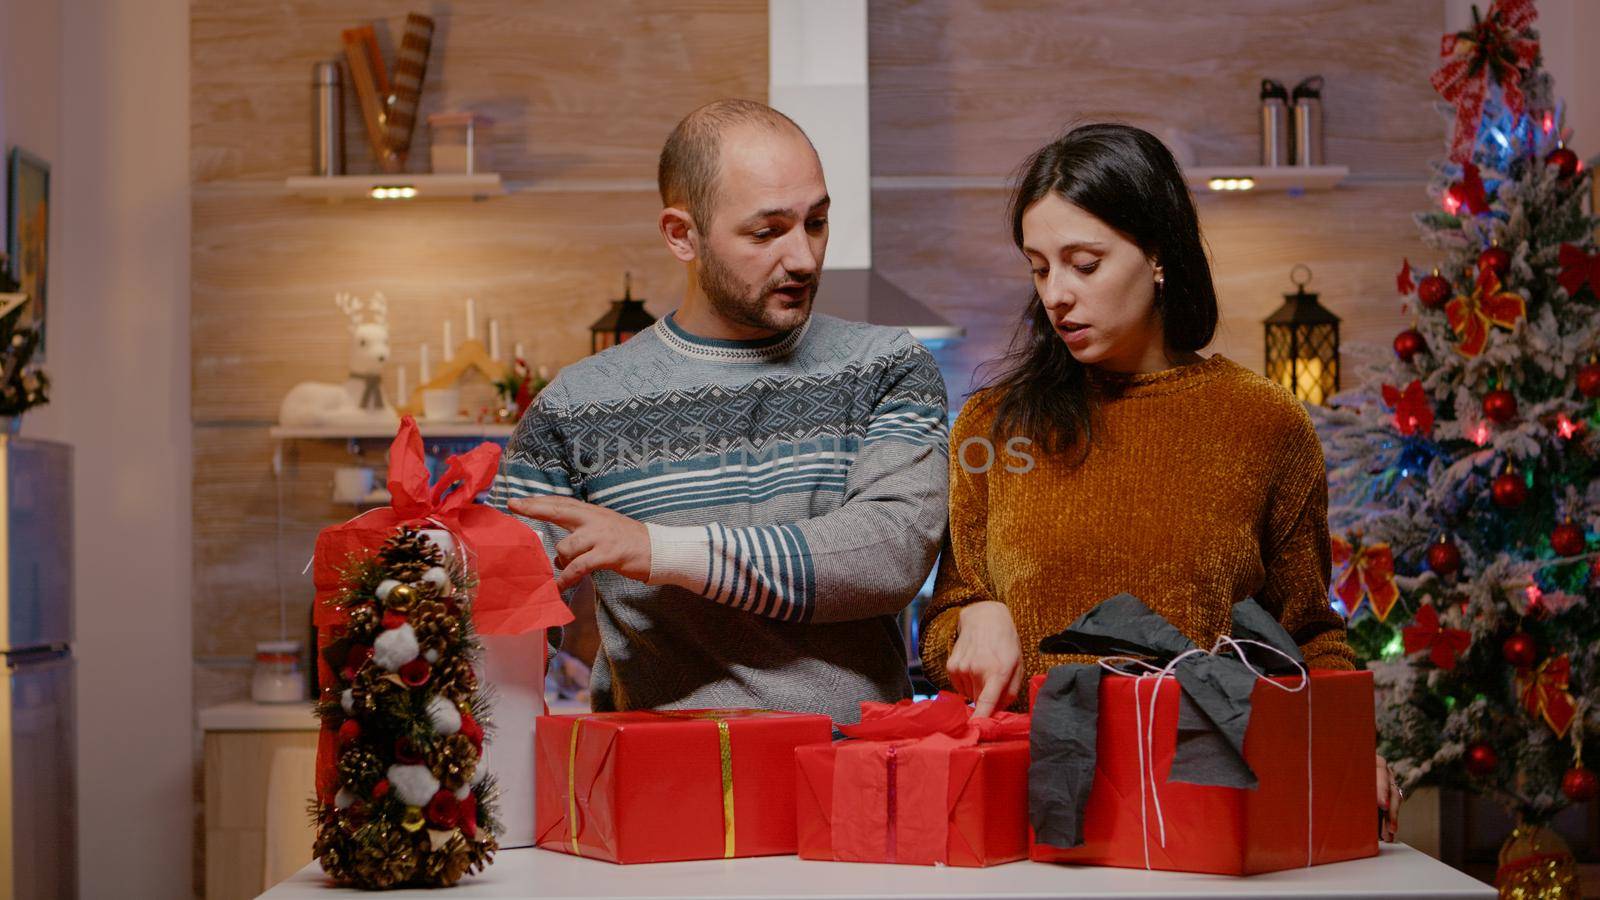 Man bringing presents to sort for family on christmas eve. Couple preparing with gift boxes, ribbon and wrapping paper for holiday celebration. Festive people celebrating winter season